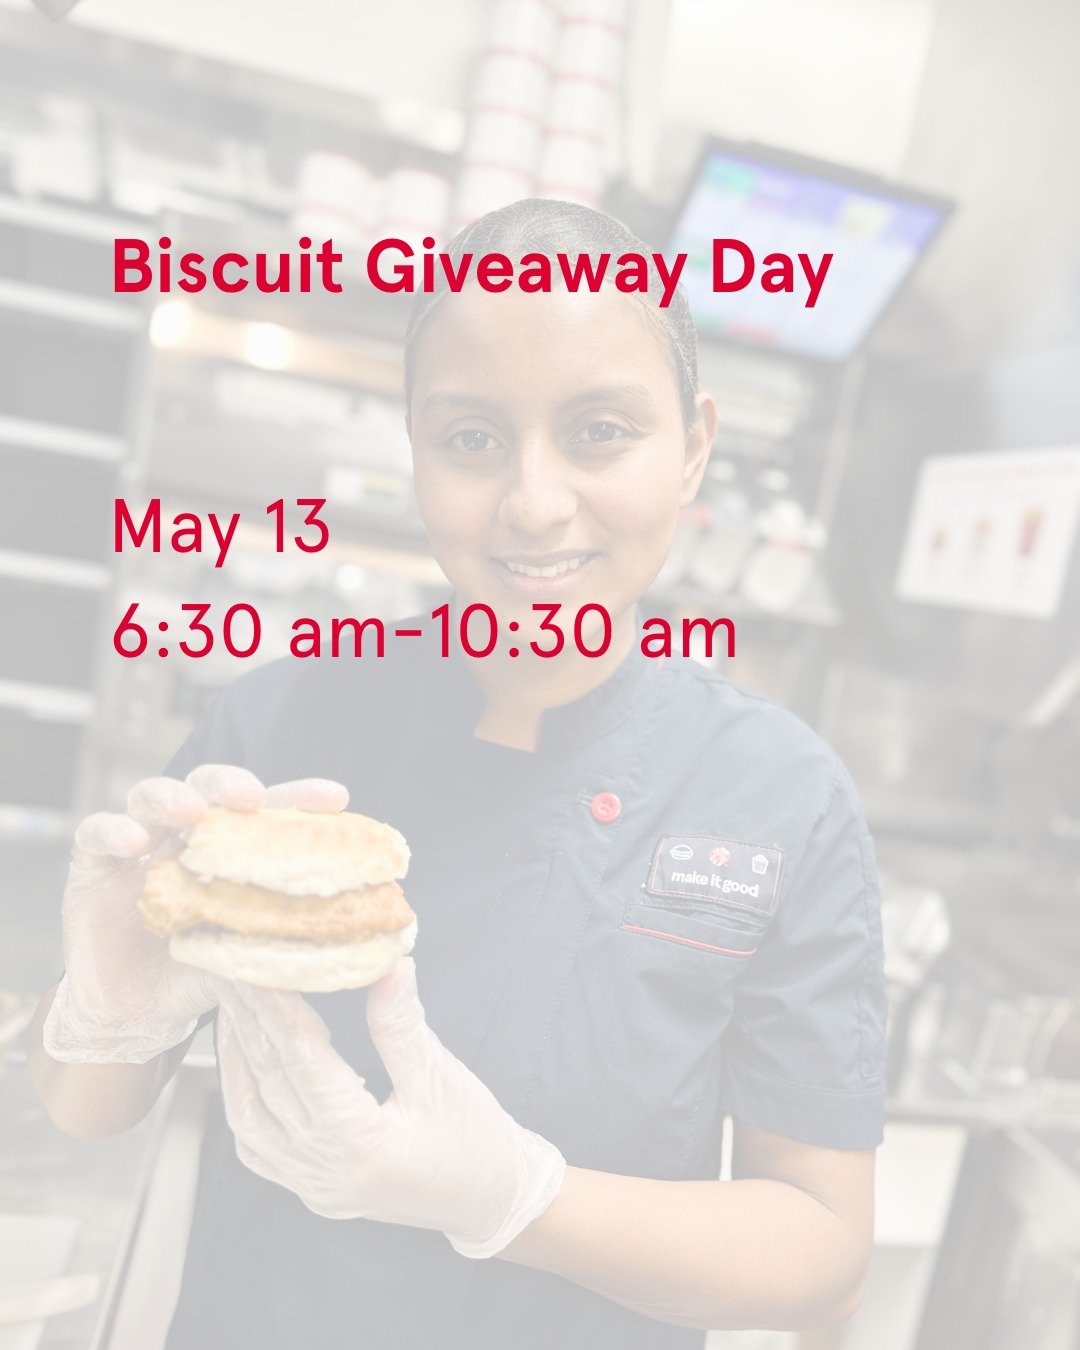 Biscuit Giveaway Day is quickly approaching! 🍽

If you haven't tried our breakfast yet, this is your chance. 😍 Stop by the restaurant on Monday, May 13, from 6:30-10:30am, make sure to mention this promotion, and receive a Free Original Chicken Bis